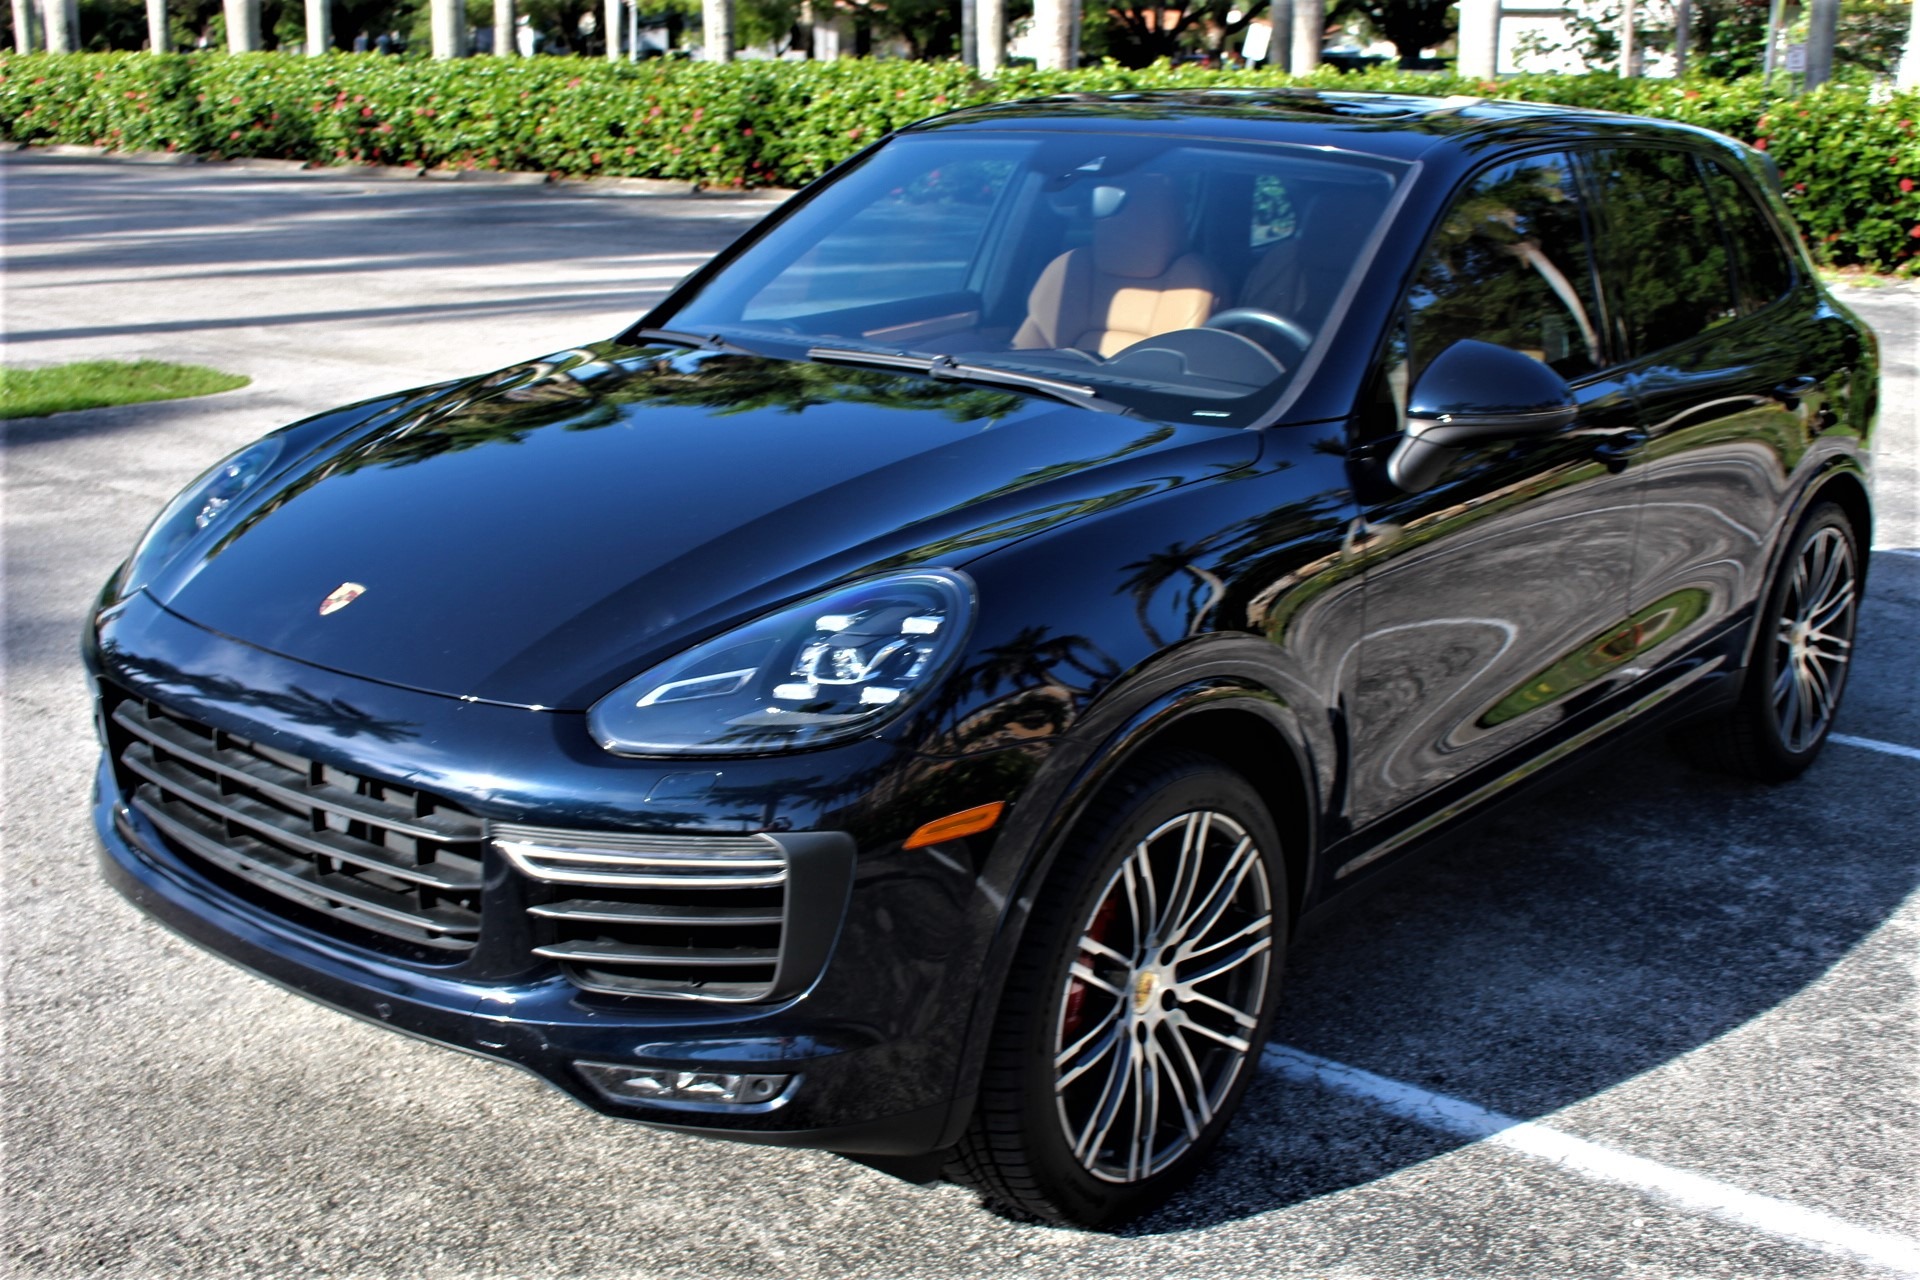 Used 2018 Porsche Cayenne Turbo for sale Sold at The Gables Sports Cars in Miami FL 33146 4